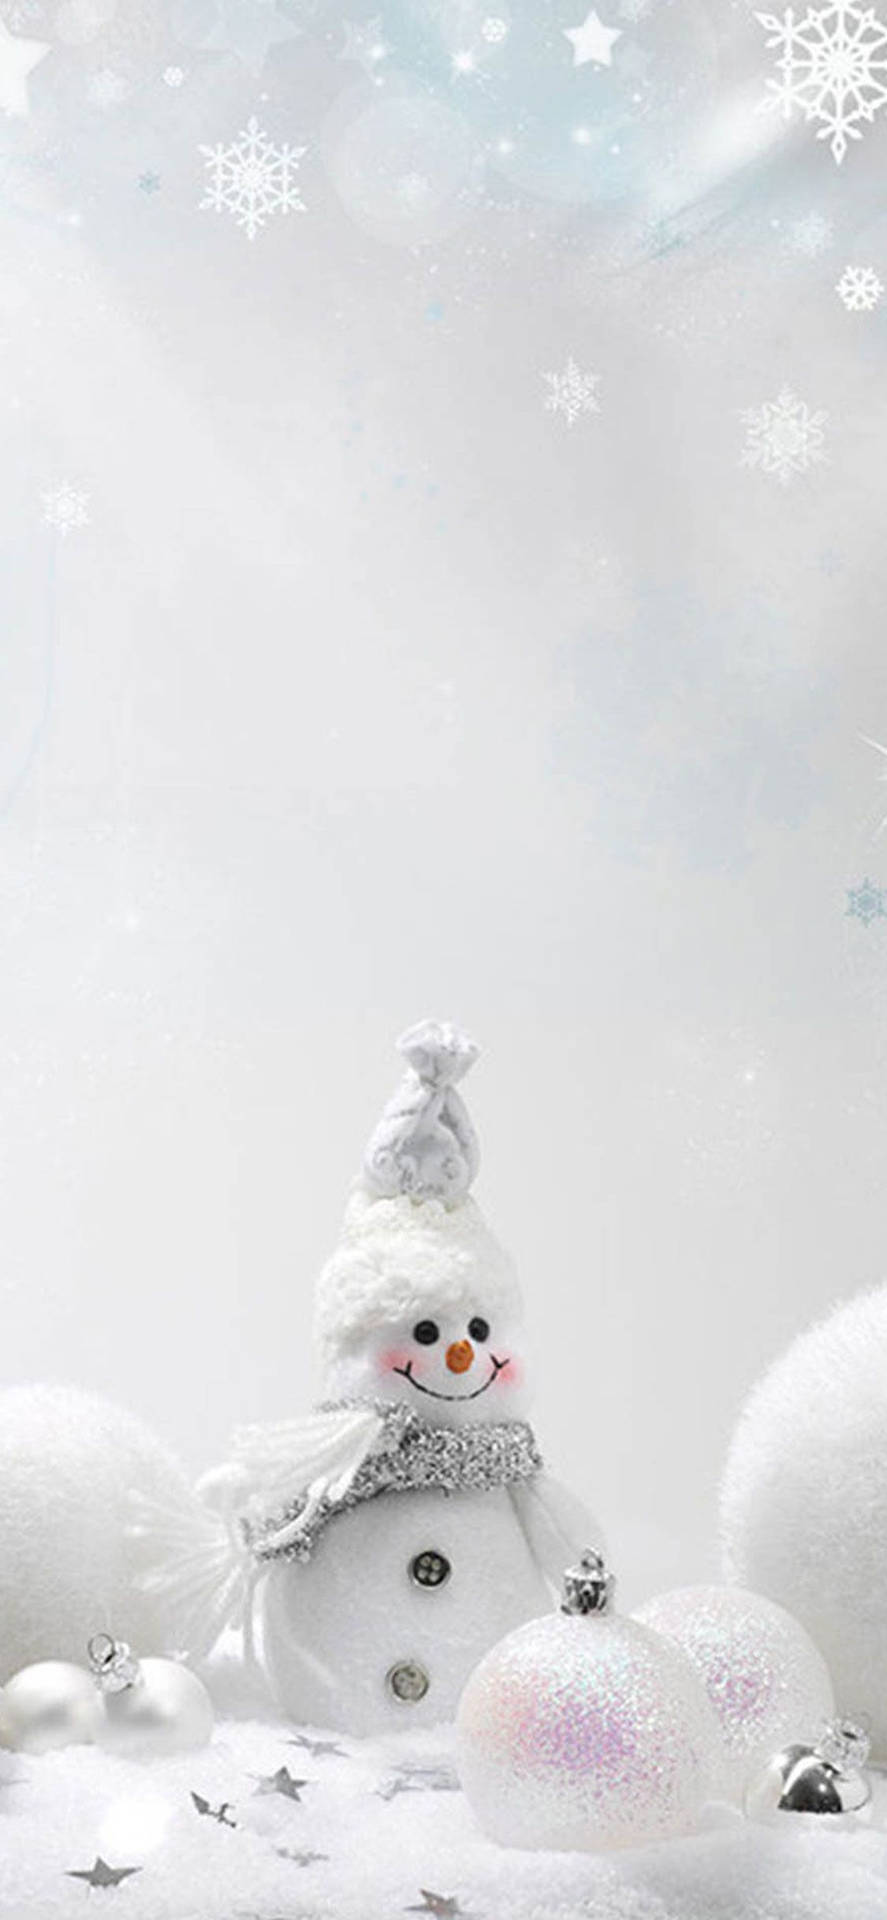 Winter Phone Smiling Snowman Background